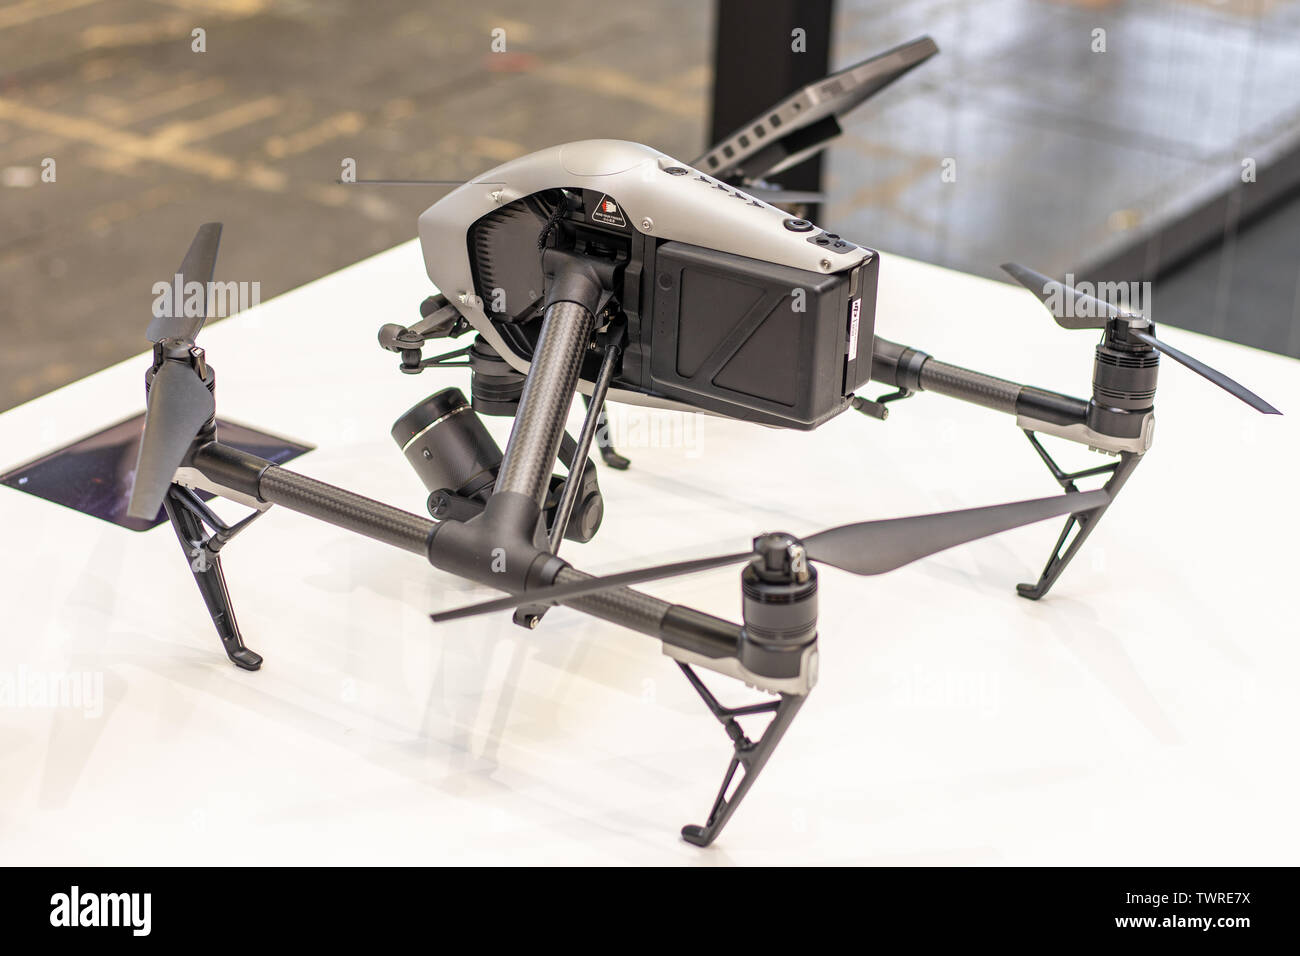 Berlin, Germany, Aug 2018 DJI Drone Inspire 2, unmanned aerial vehicles  UAV, DJI exhibition stand at Global Innovations Show IFA 2018 Stock Photo -  Alamy